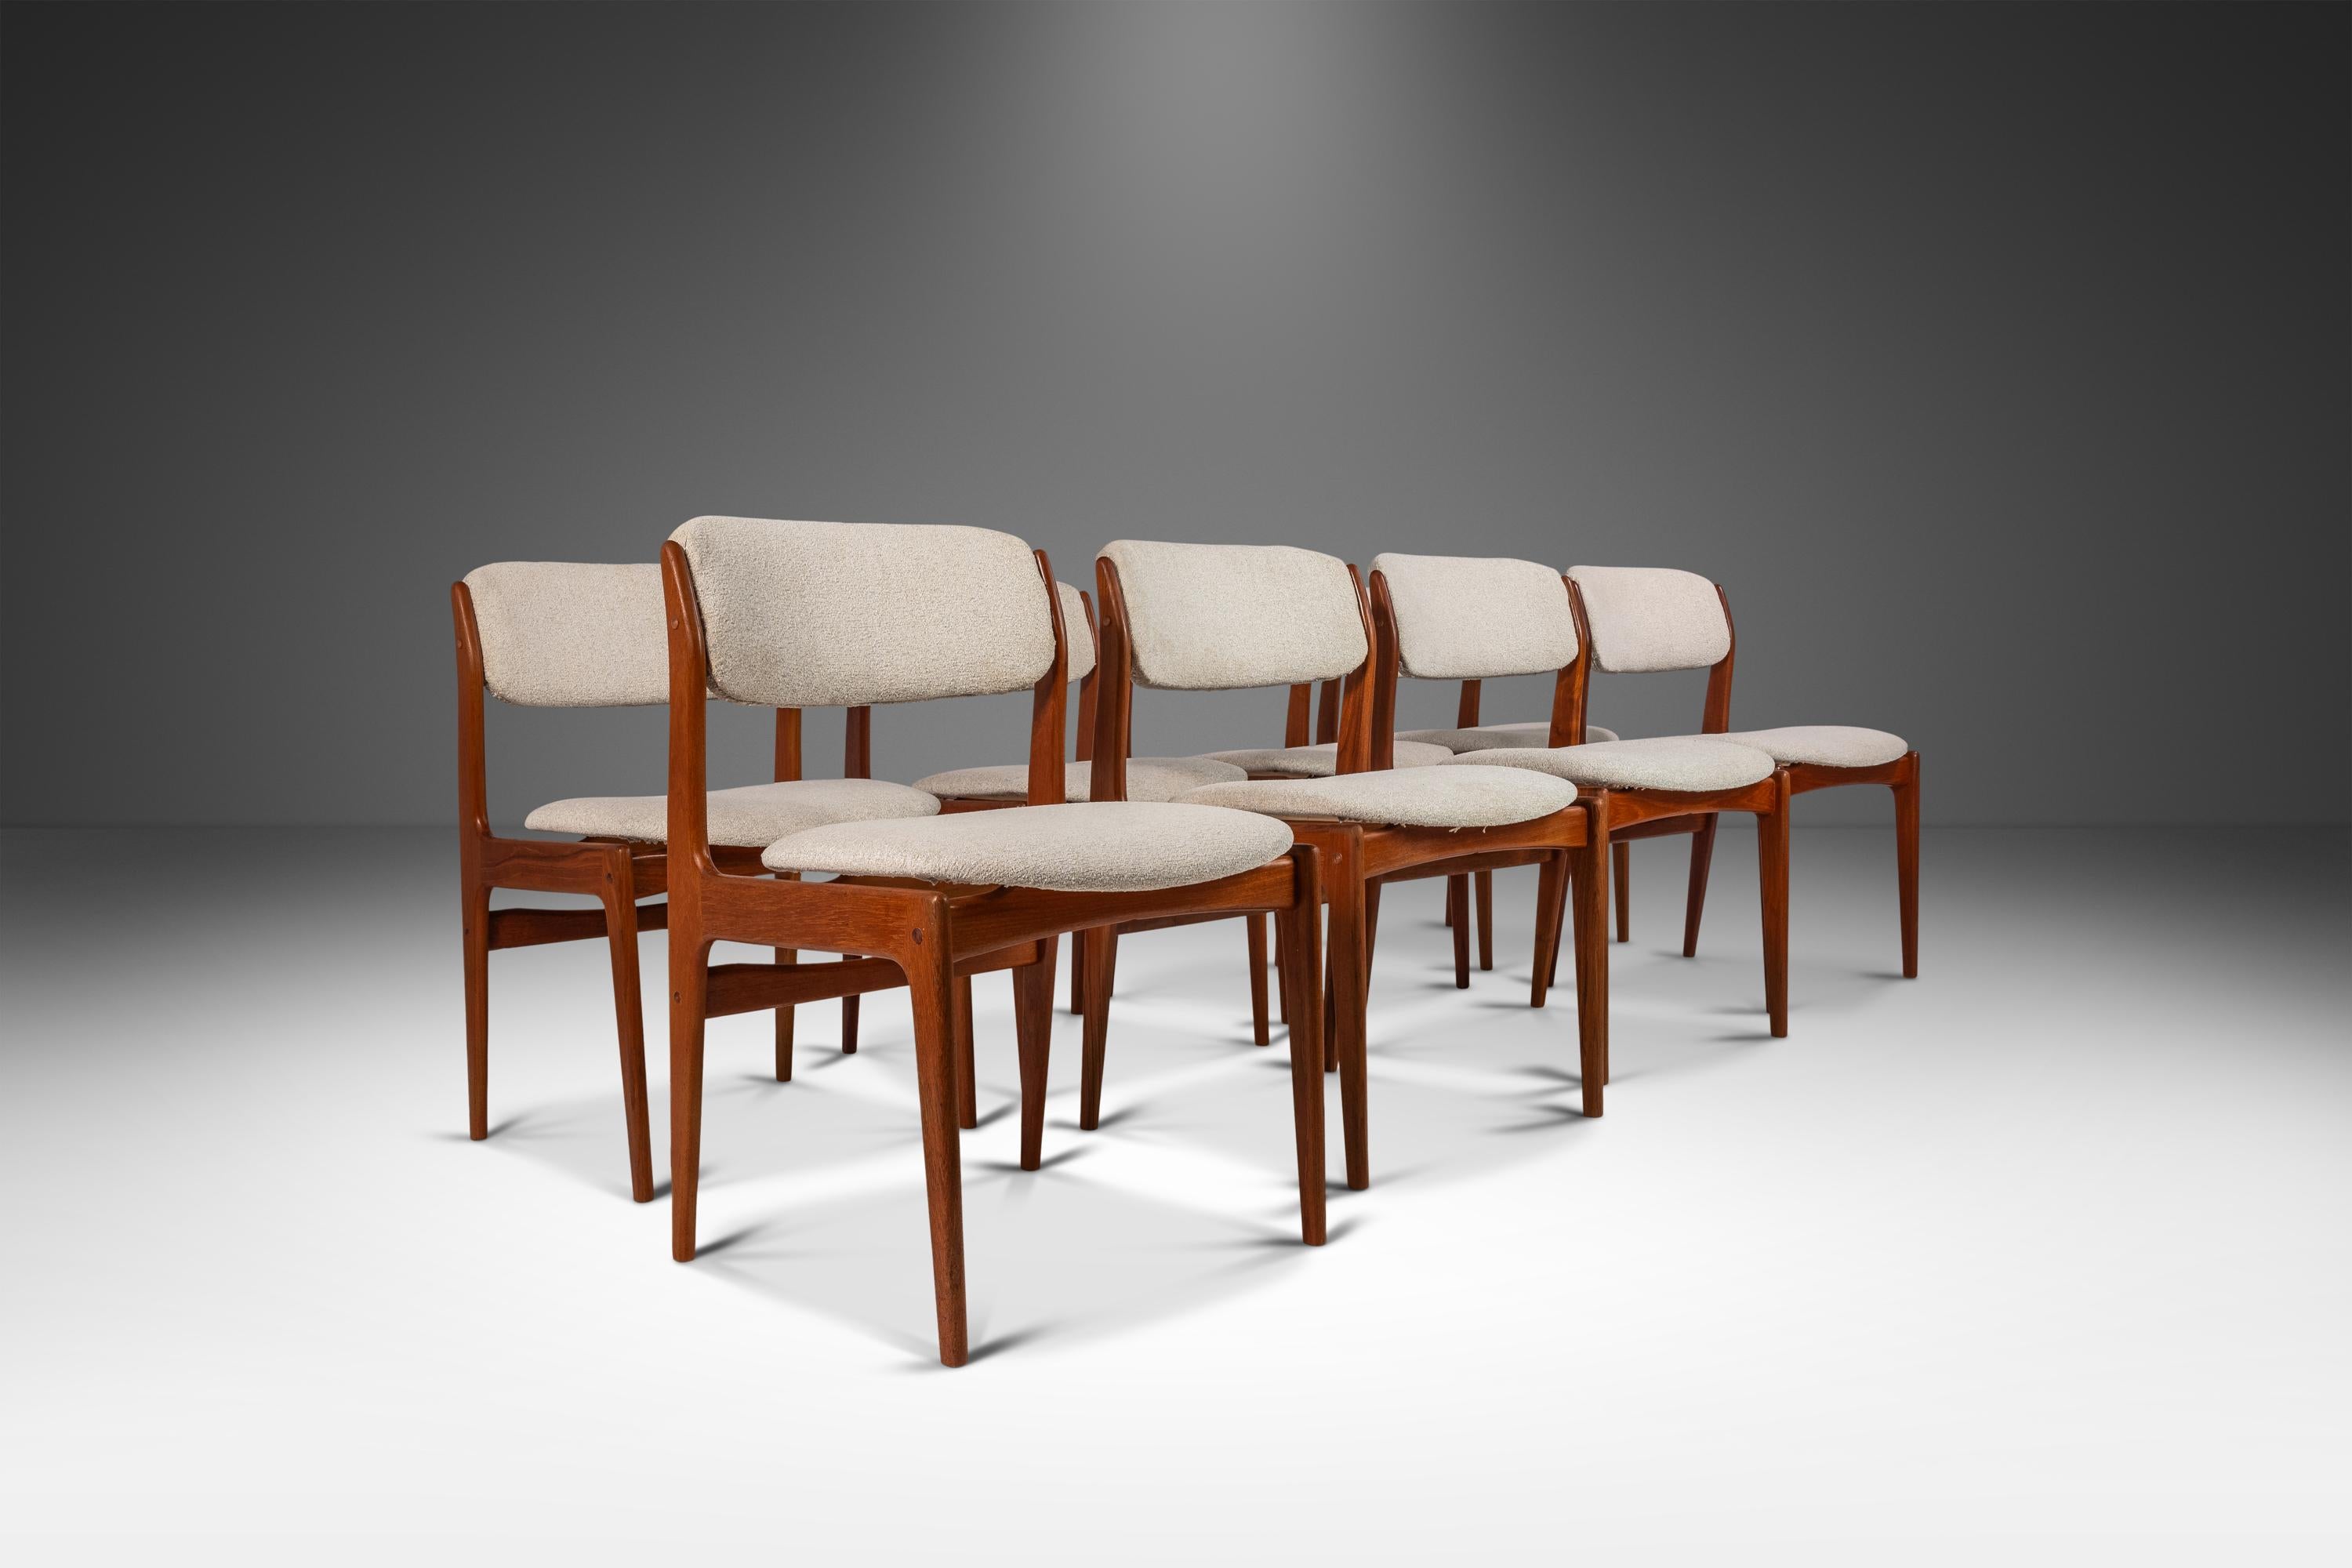 Set of Eight (8) Danish Modern Dining Chairs in Teak by Benny Linden, c. 1970's 1